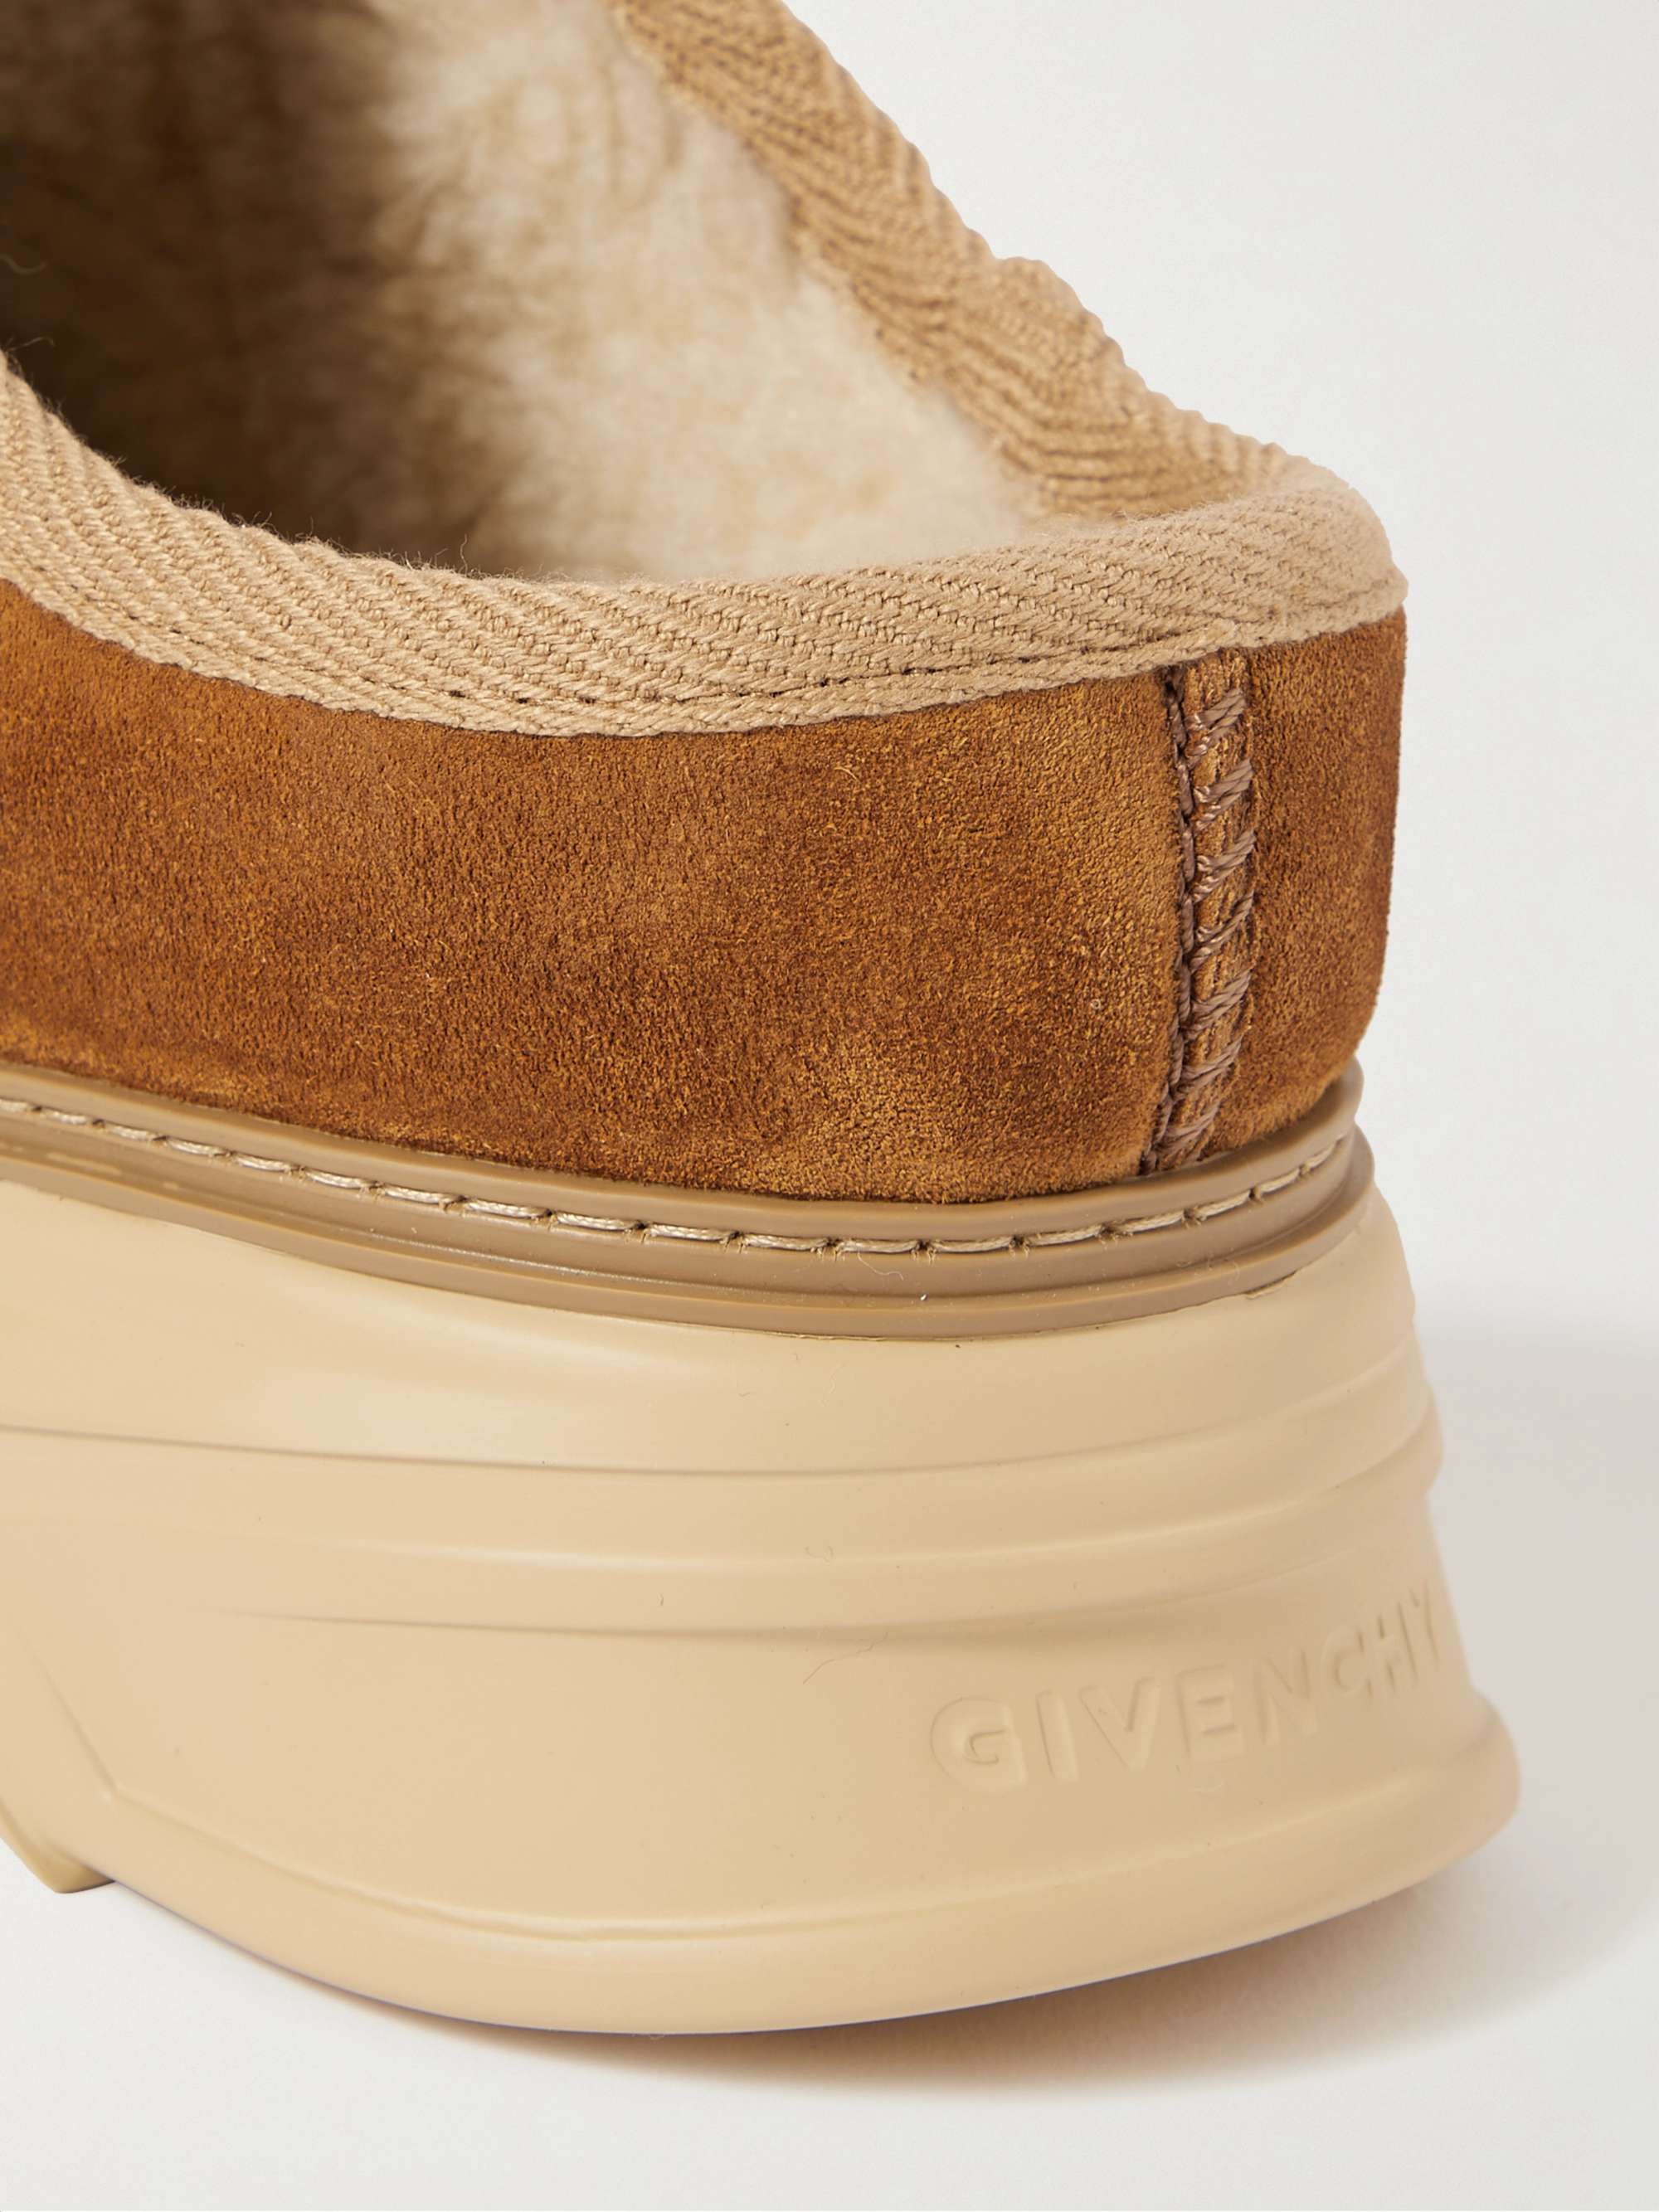 GIVENCHY Winter Mallow Faux Shearling-Lined Suede Mules